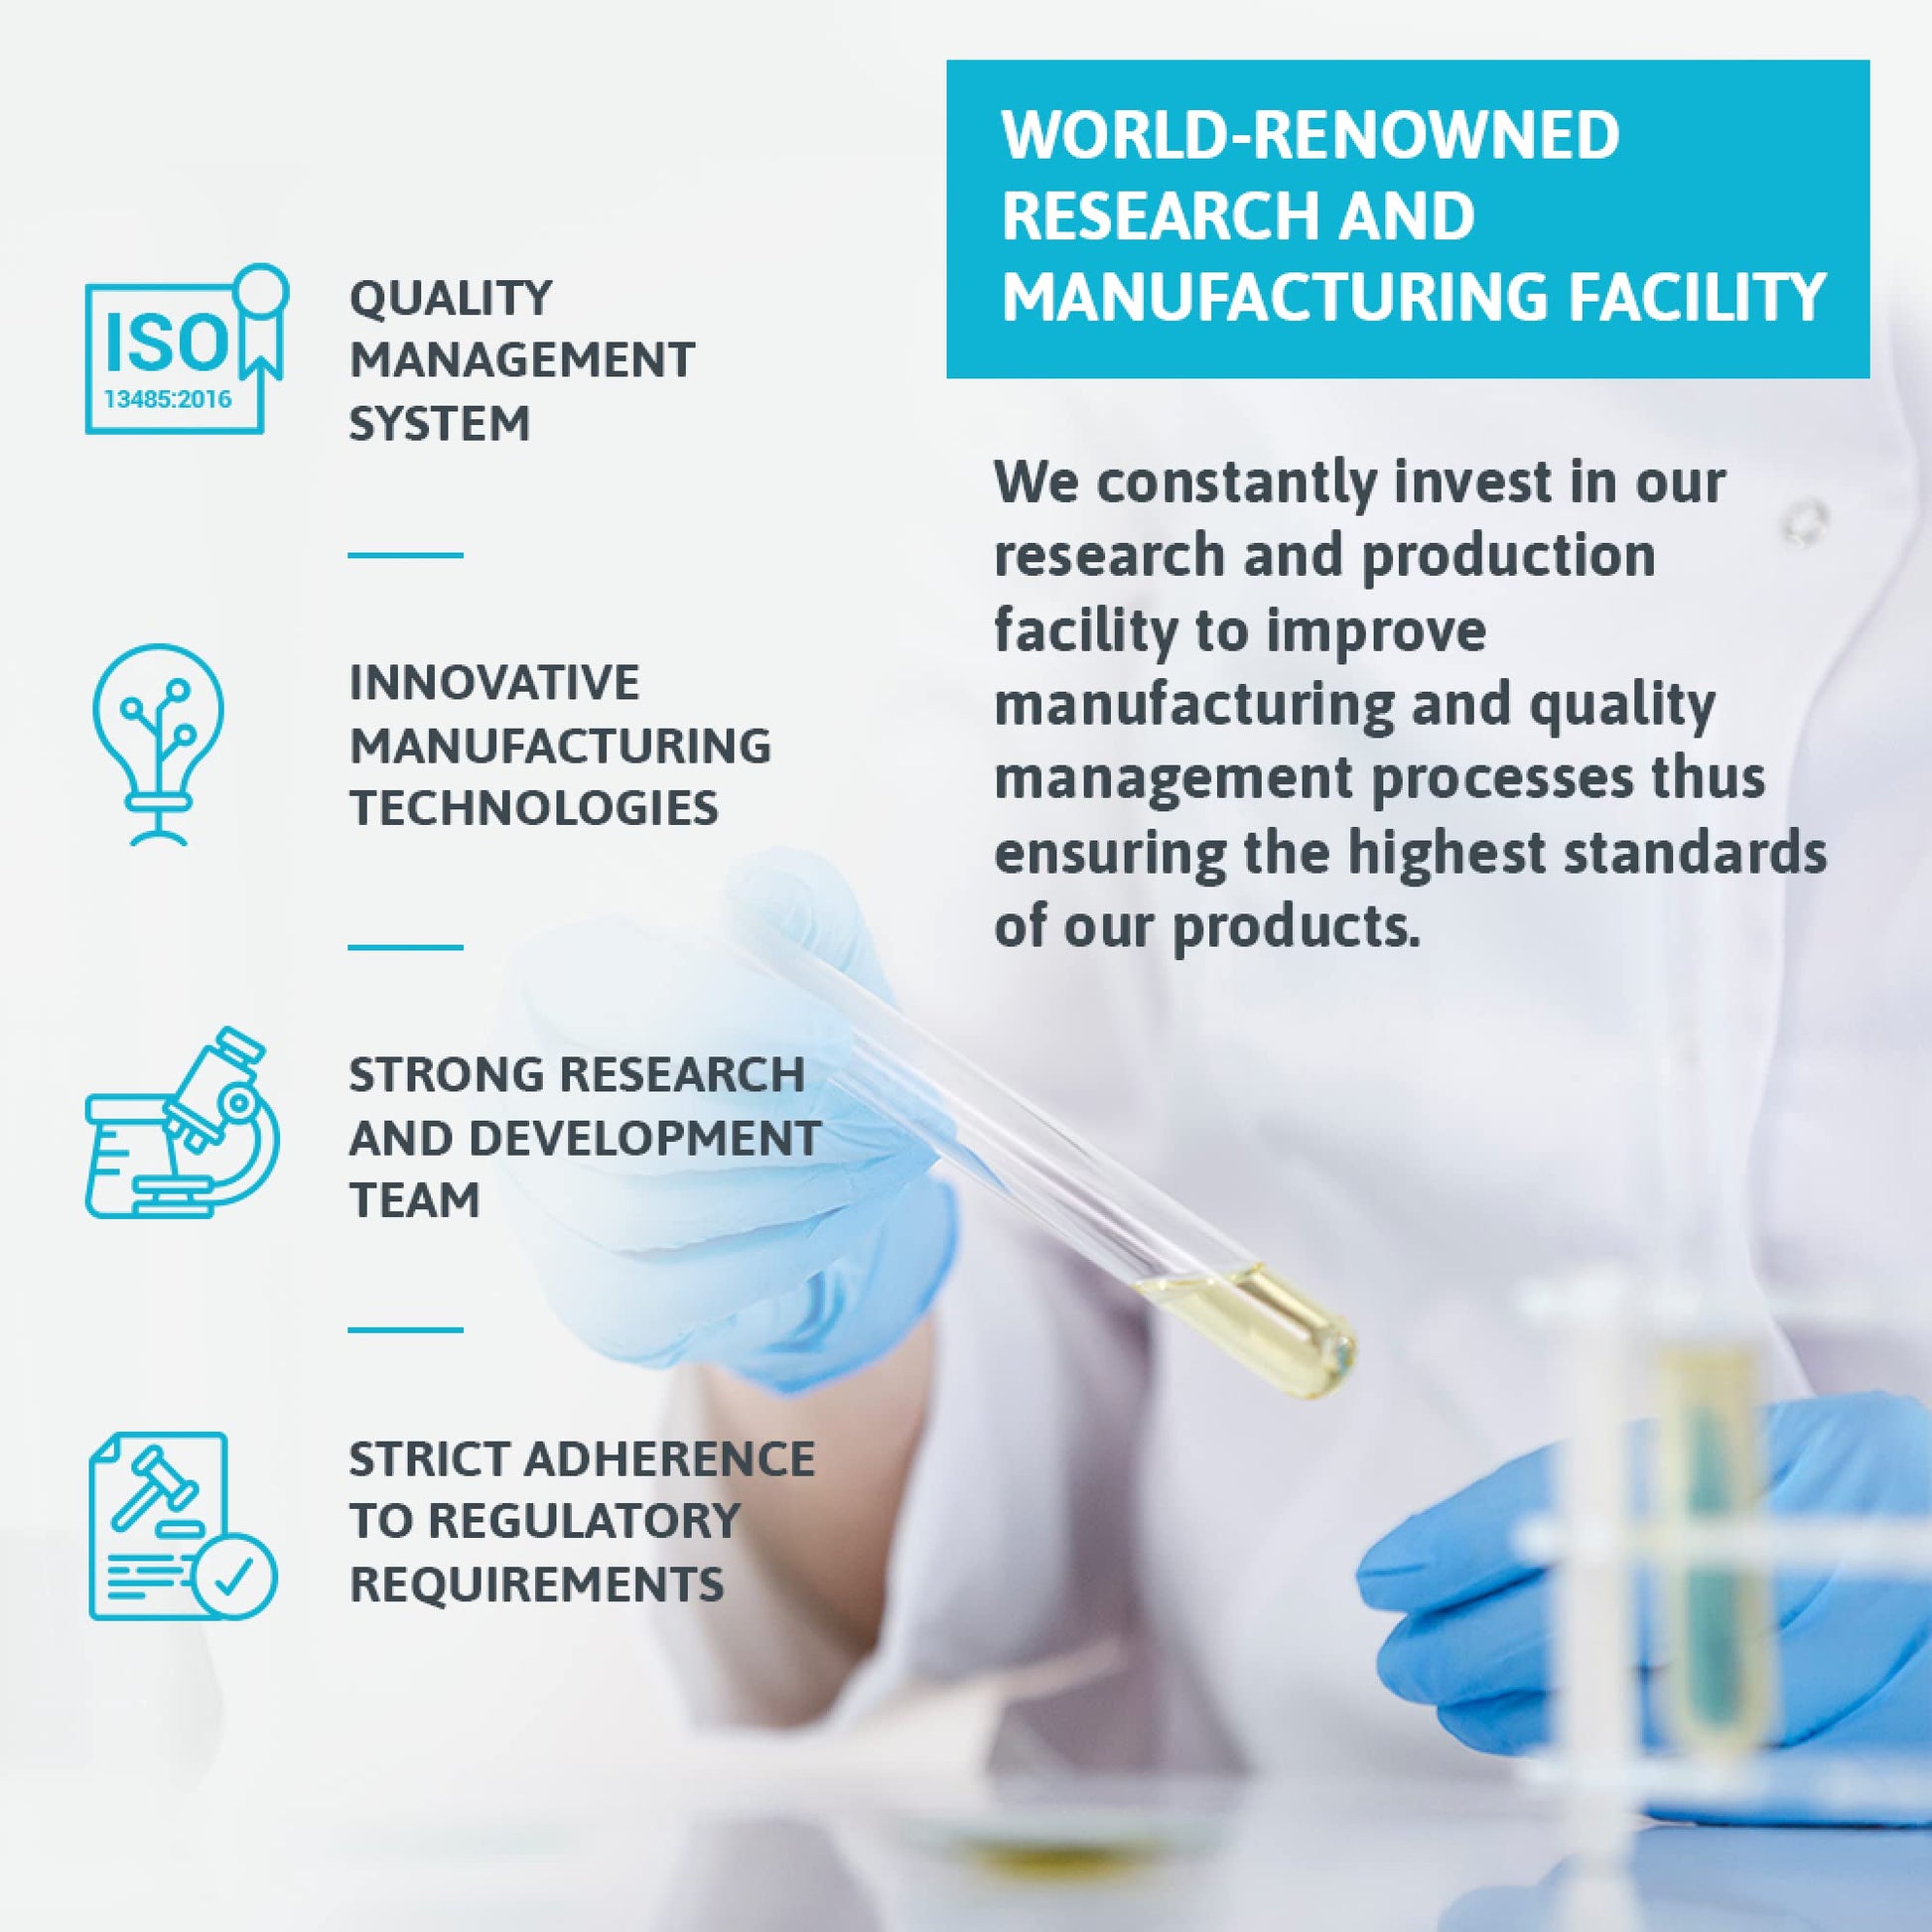 Image featuring text description of a world-renowned research and manufacturing facility